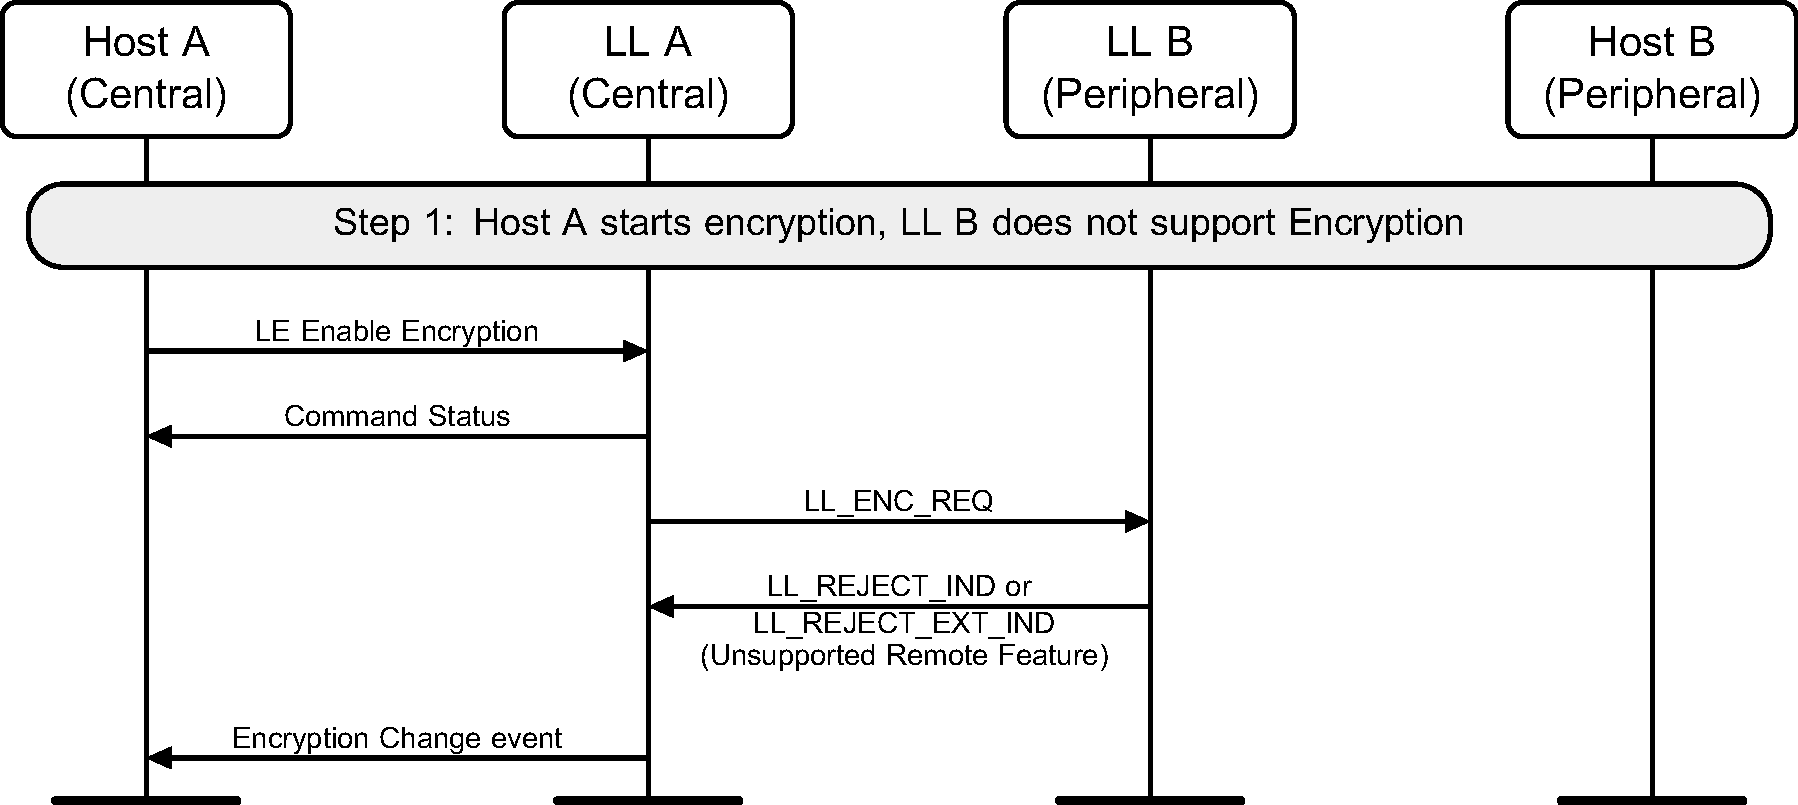 Start encryption failure when Peripheral does not support encryption